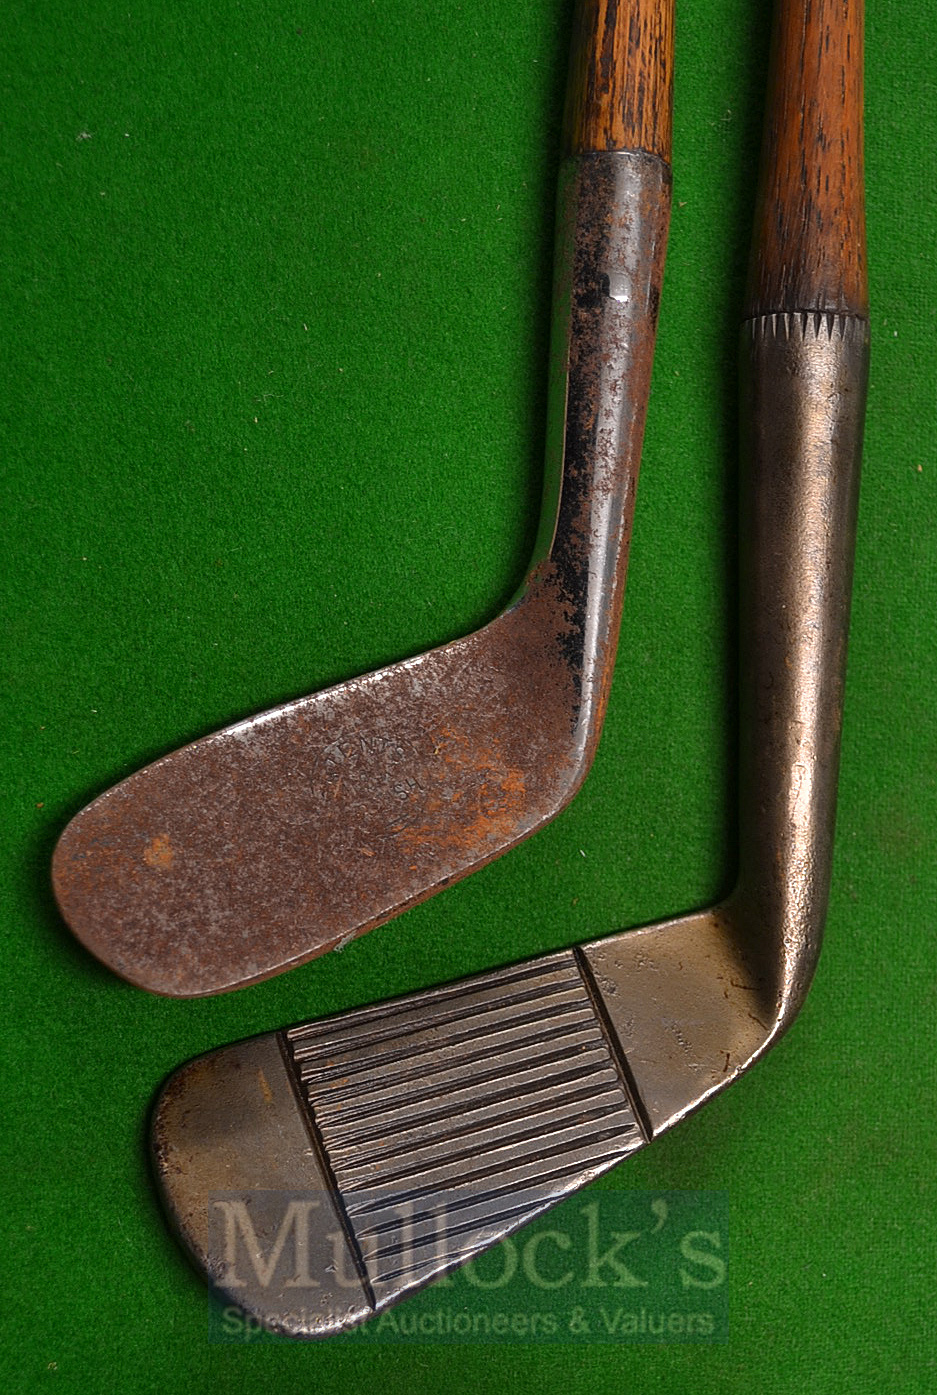 Myles of Dundee ‘Rexor’ Smooth Faced Driving Iron with round back together with a Spalding Harry - Image 2 of 2